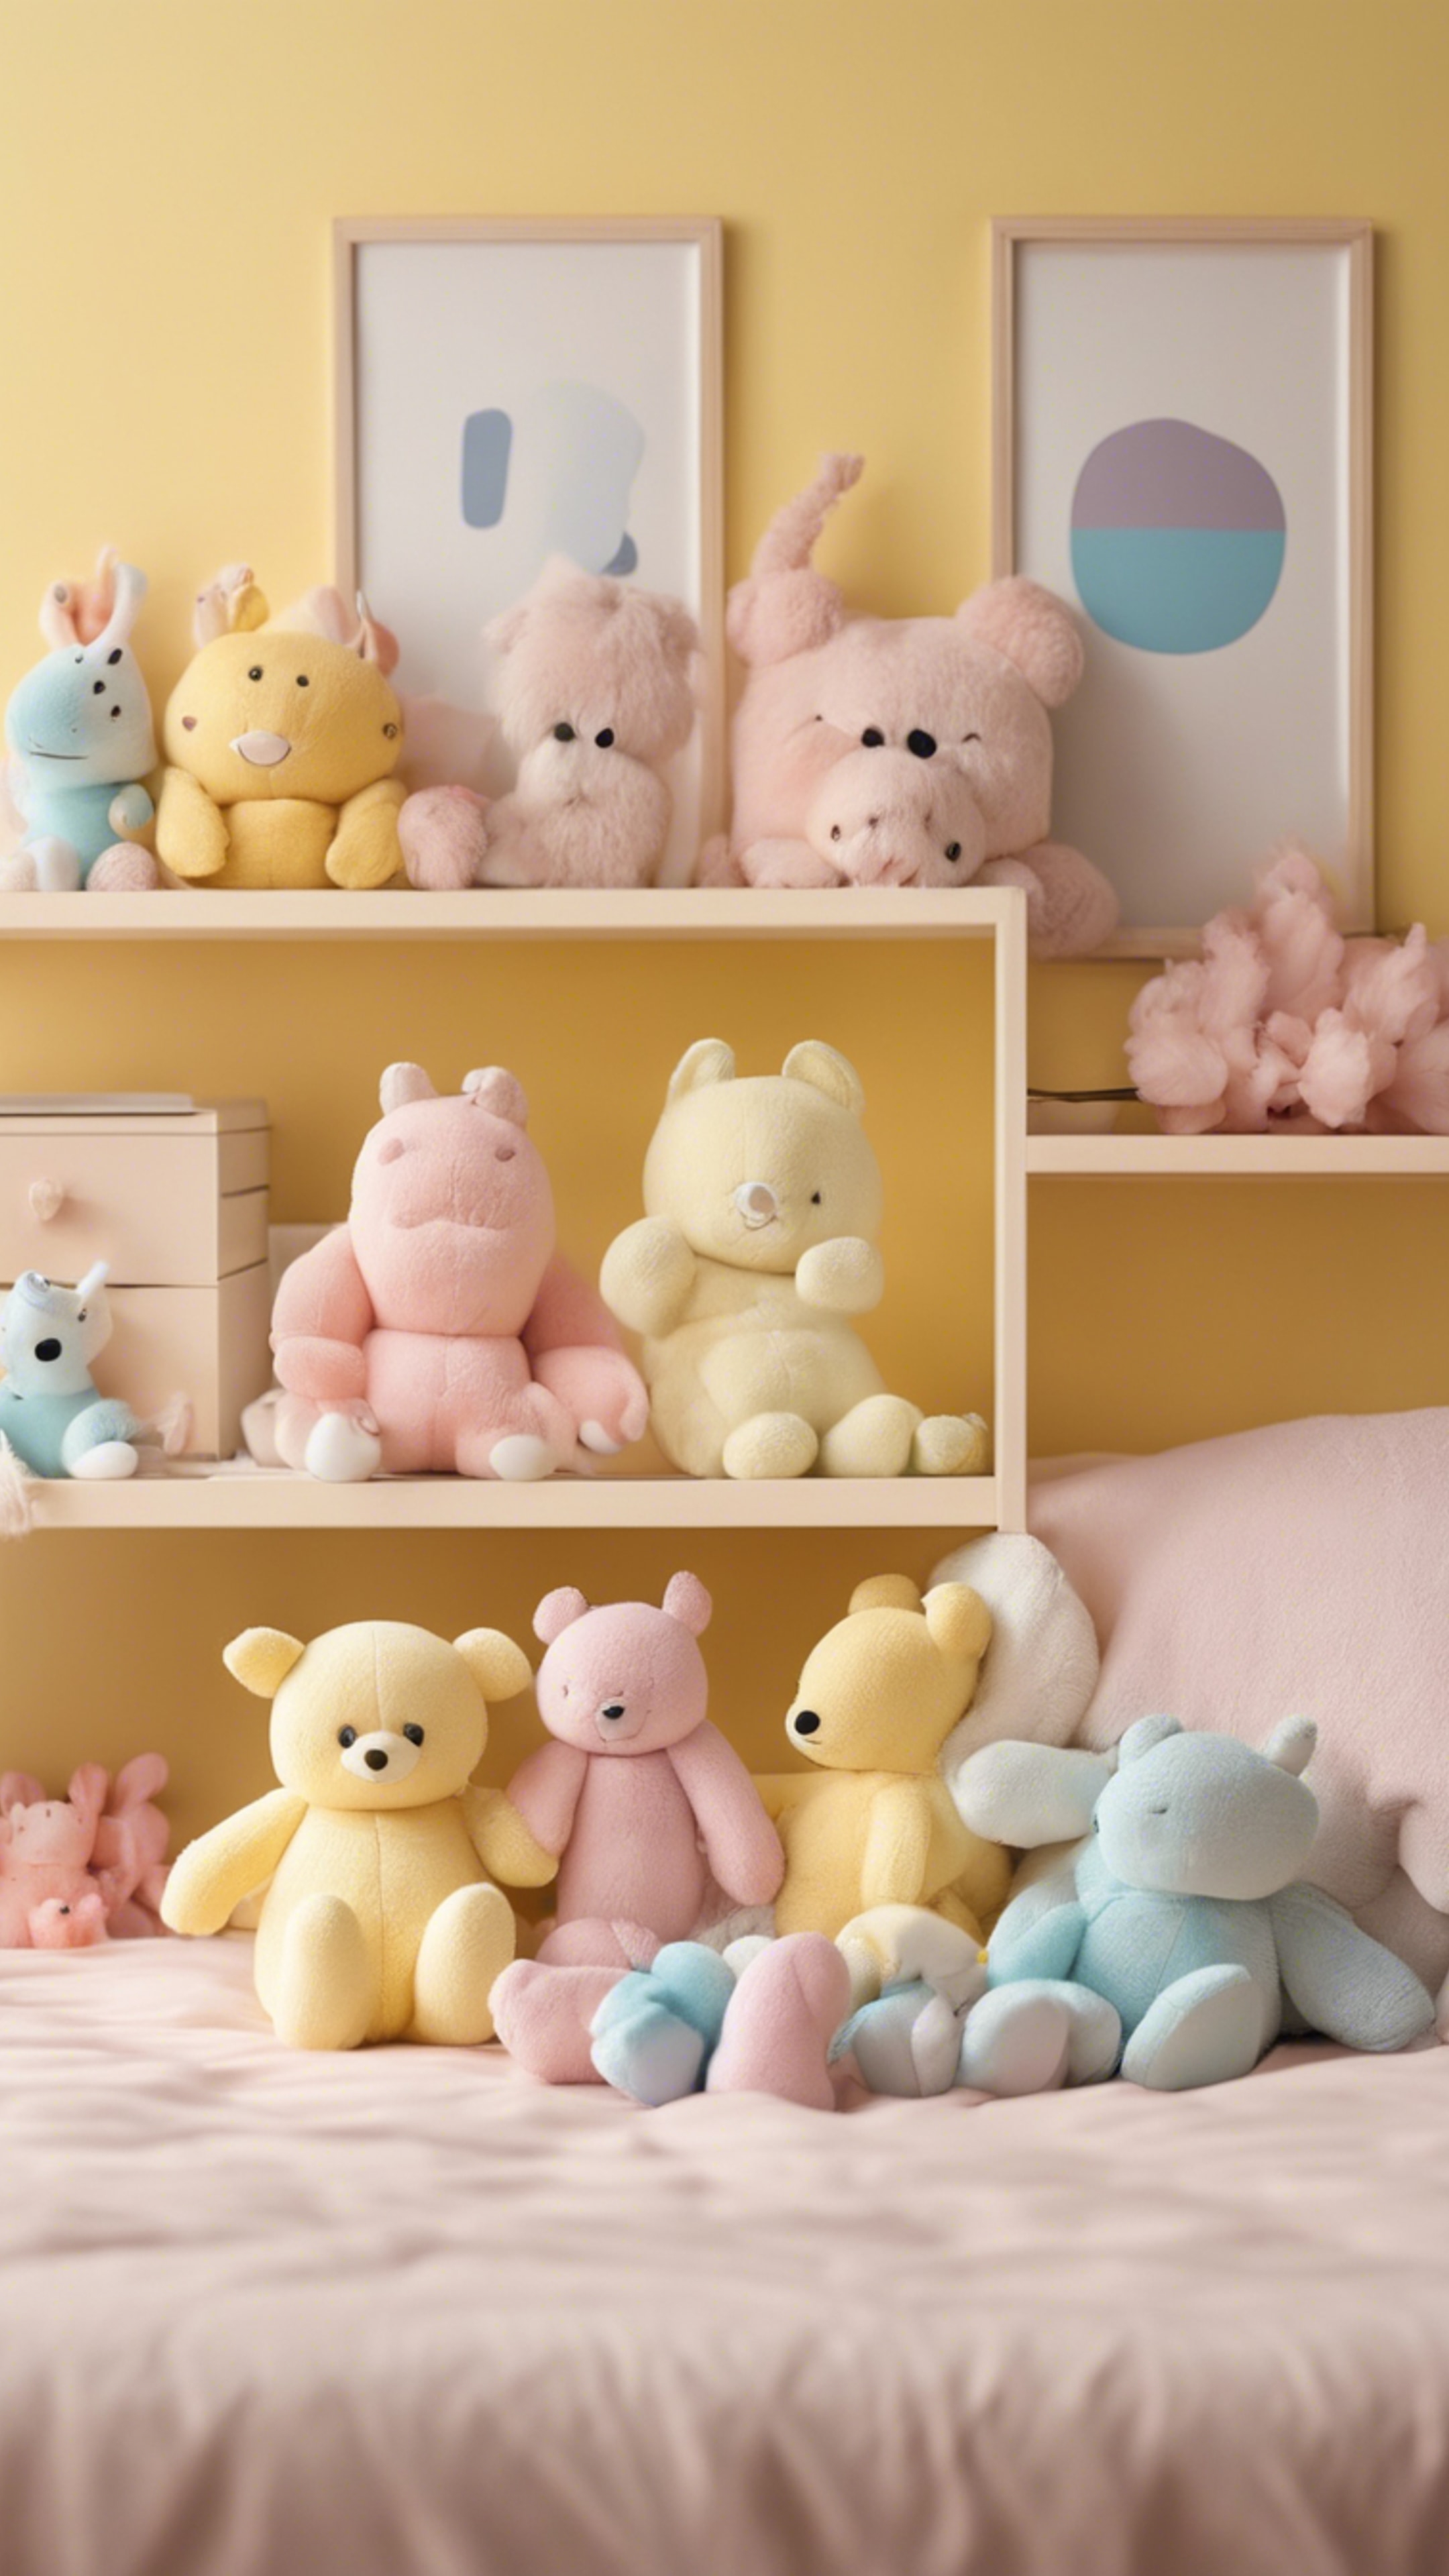 Tidy bedroom with pastel yellow walls decorated with kawaii plush toys. Behang[bea5098546c74f3e98b3]